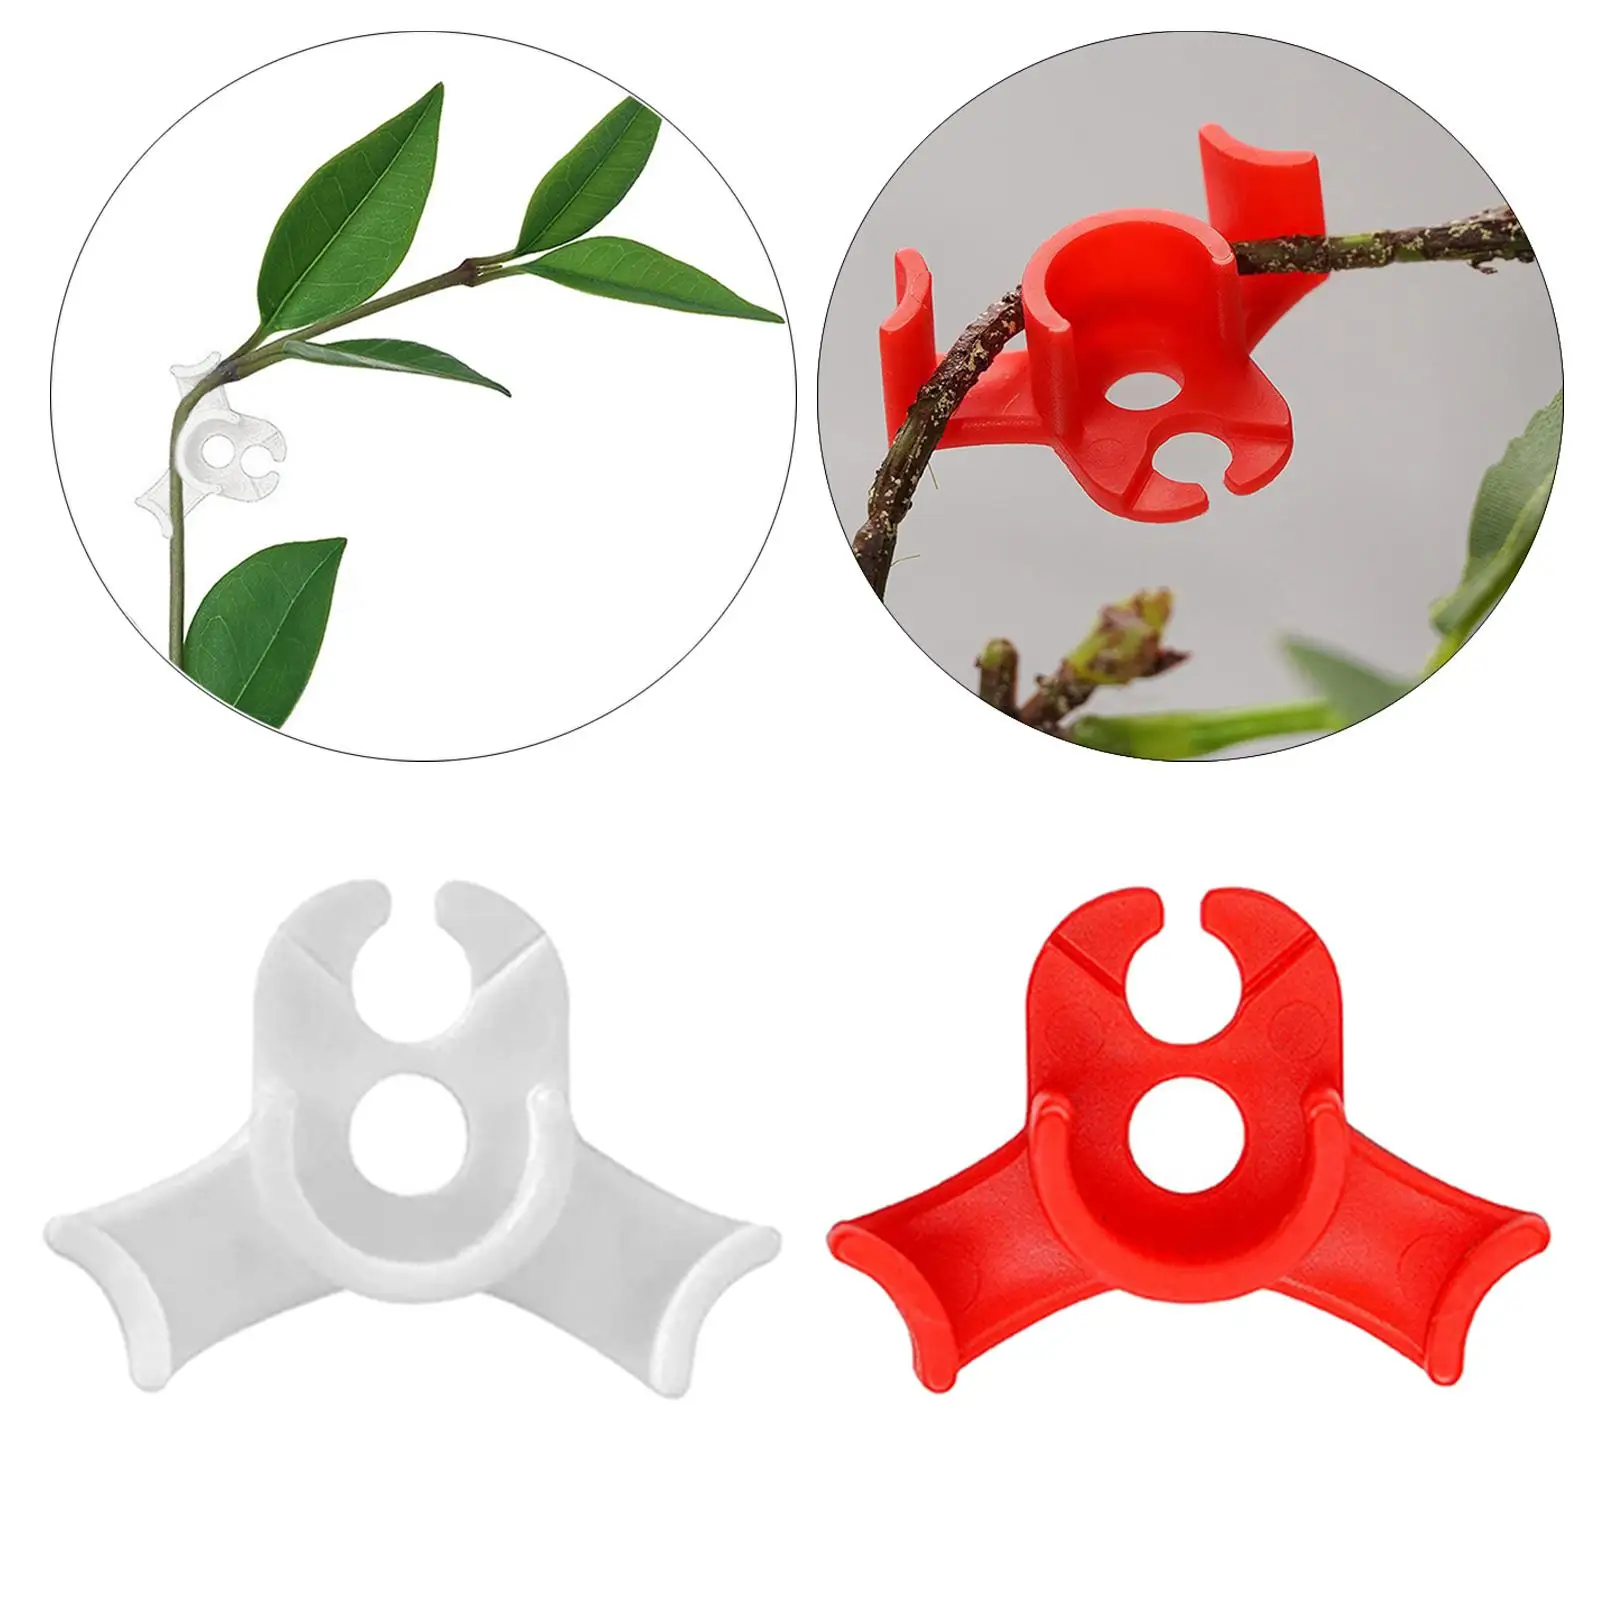 10 Pieces Lst Clip Control The Growth for Low Stress Training Plant Bender